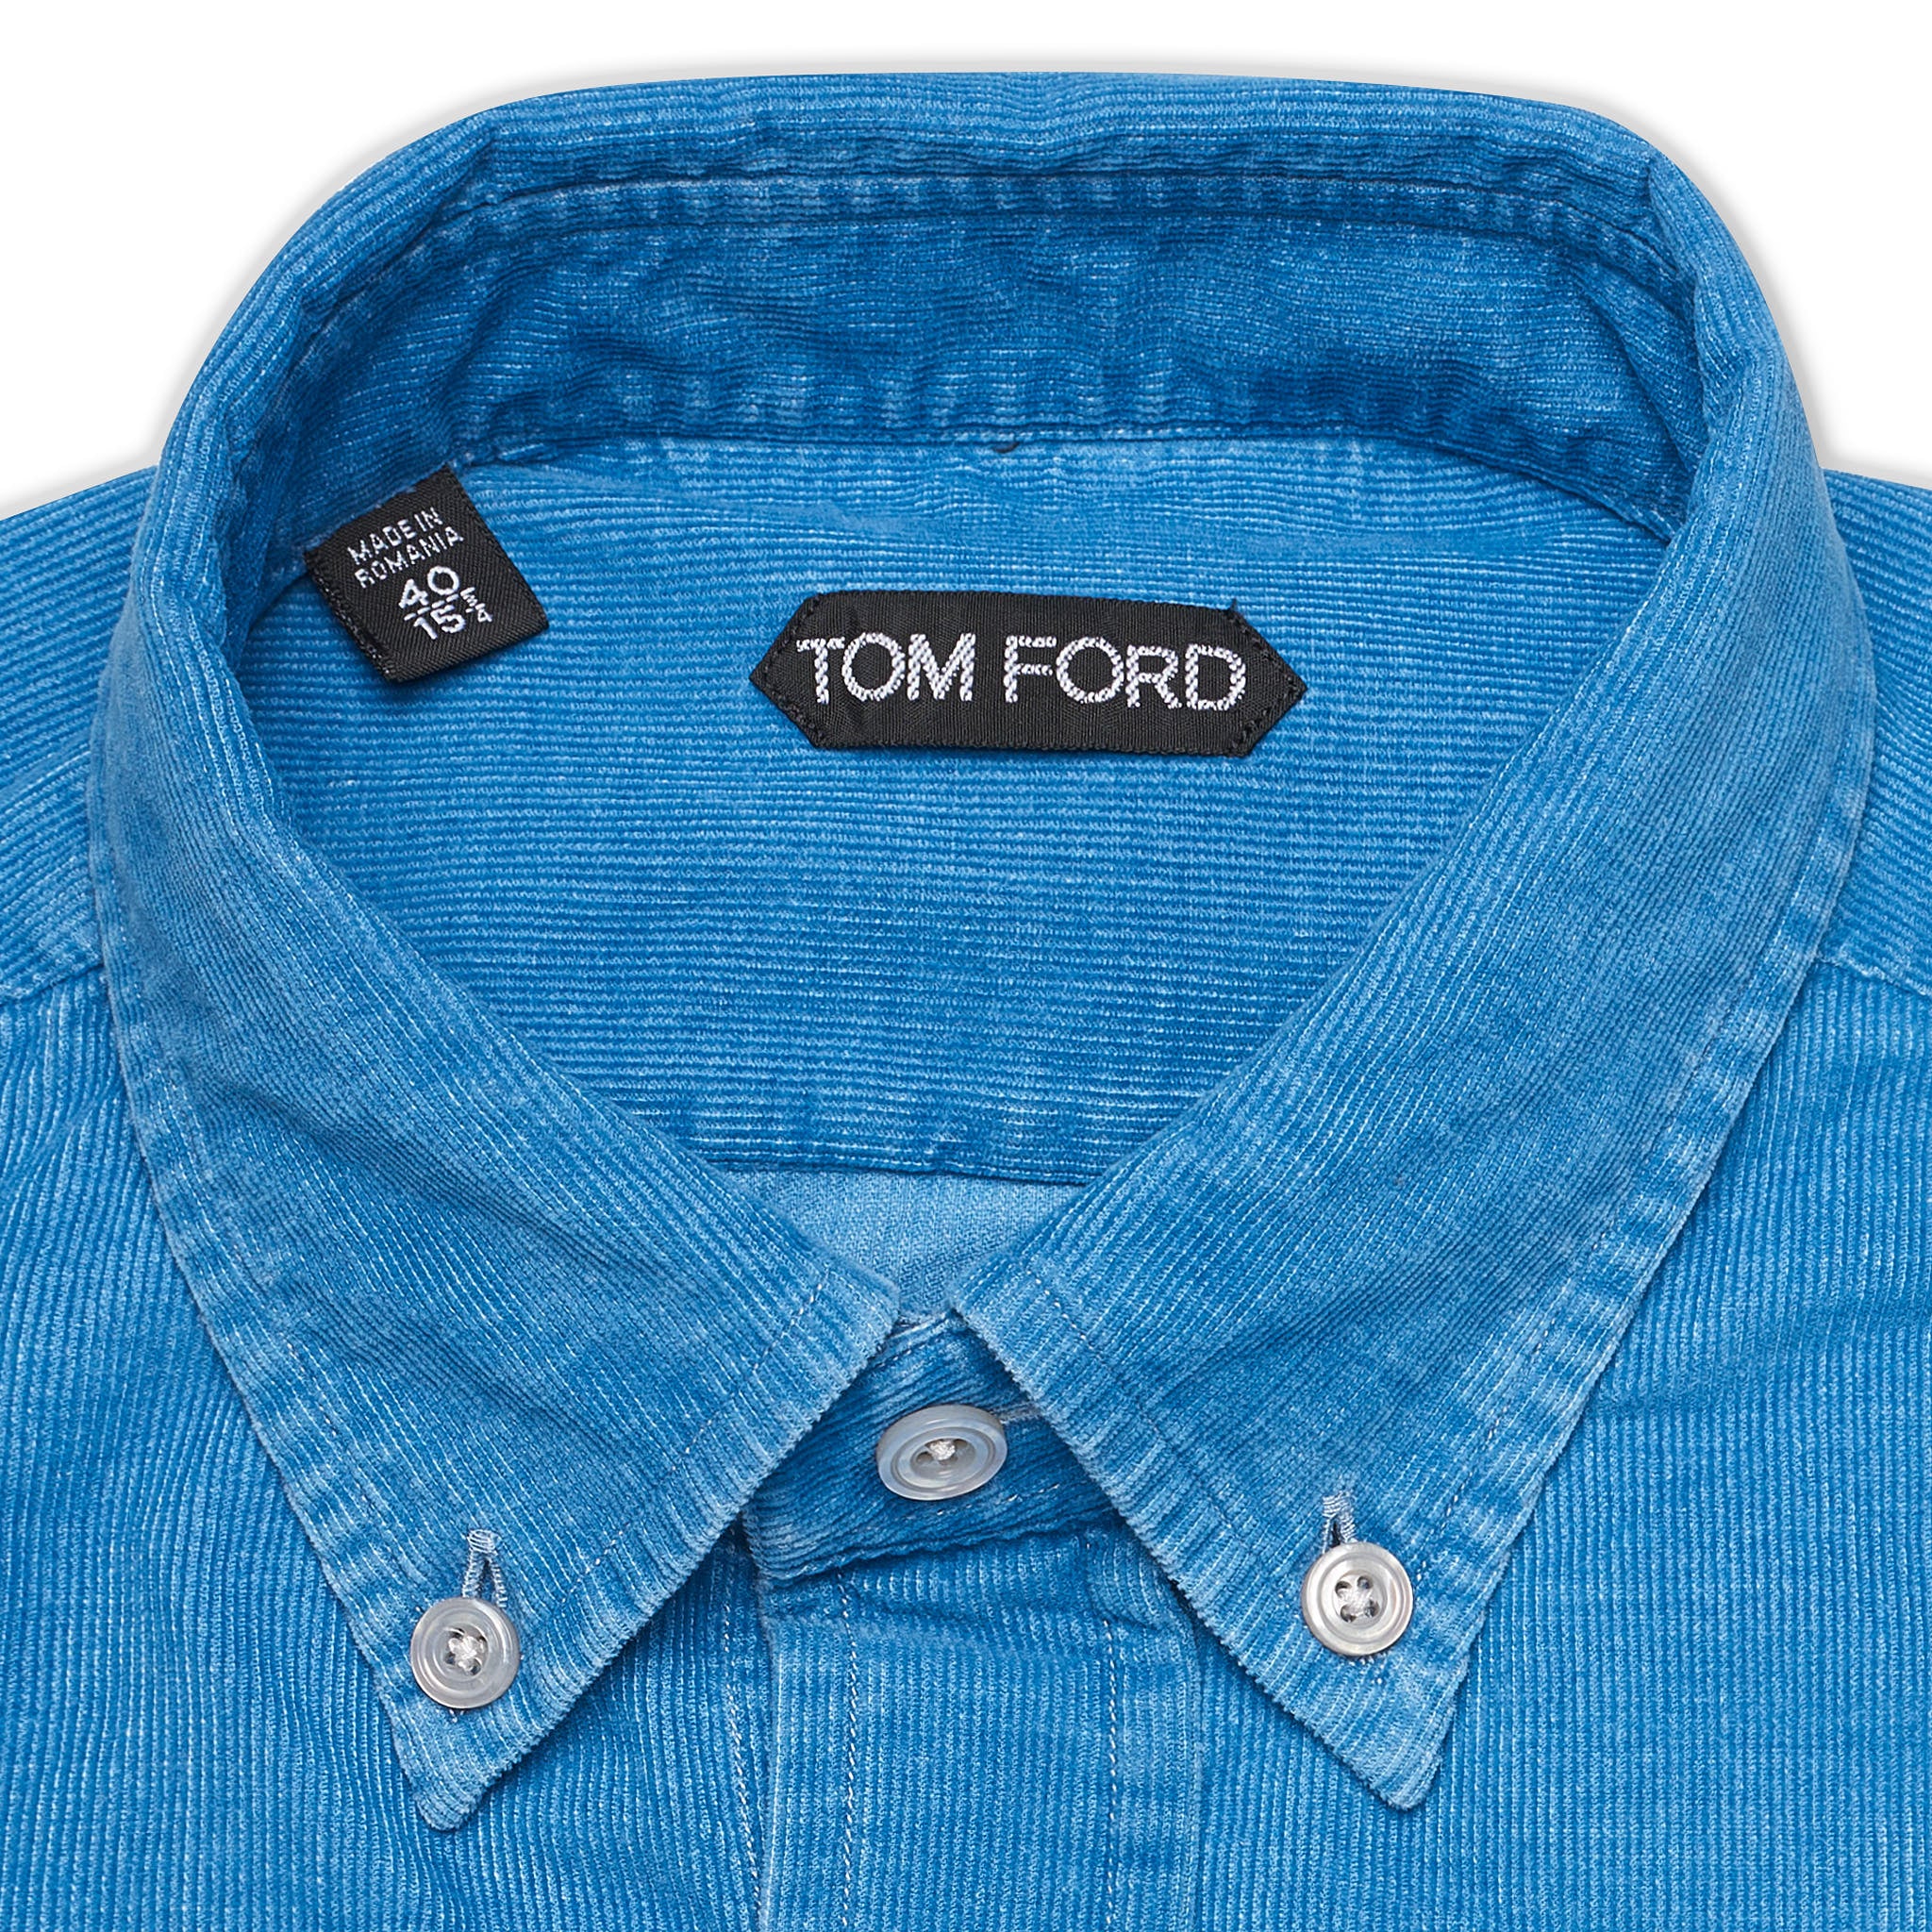 TOM FORD Blue Corduroy Cotton Button-Down Casual Shirt NEW Slim Fit 15.5 TOM FORD